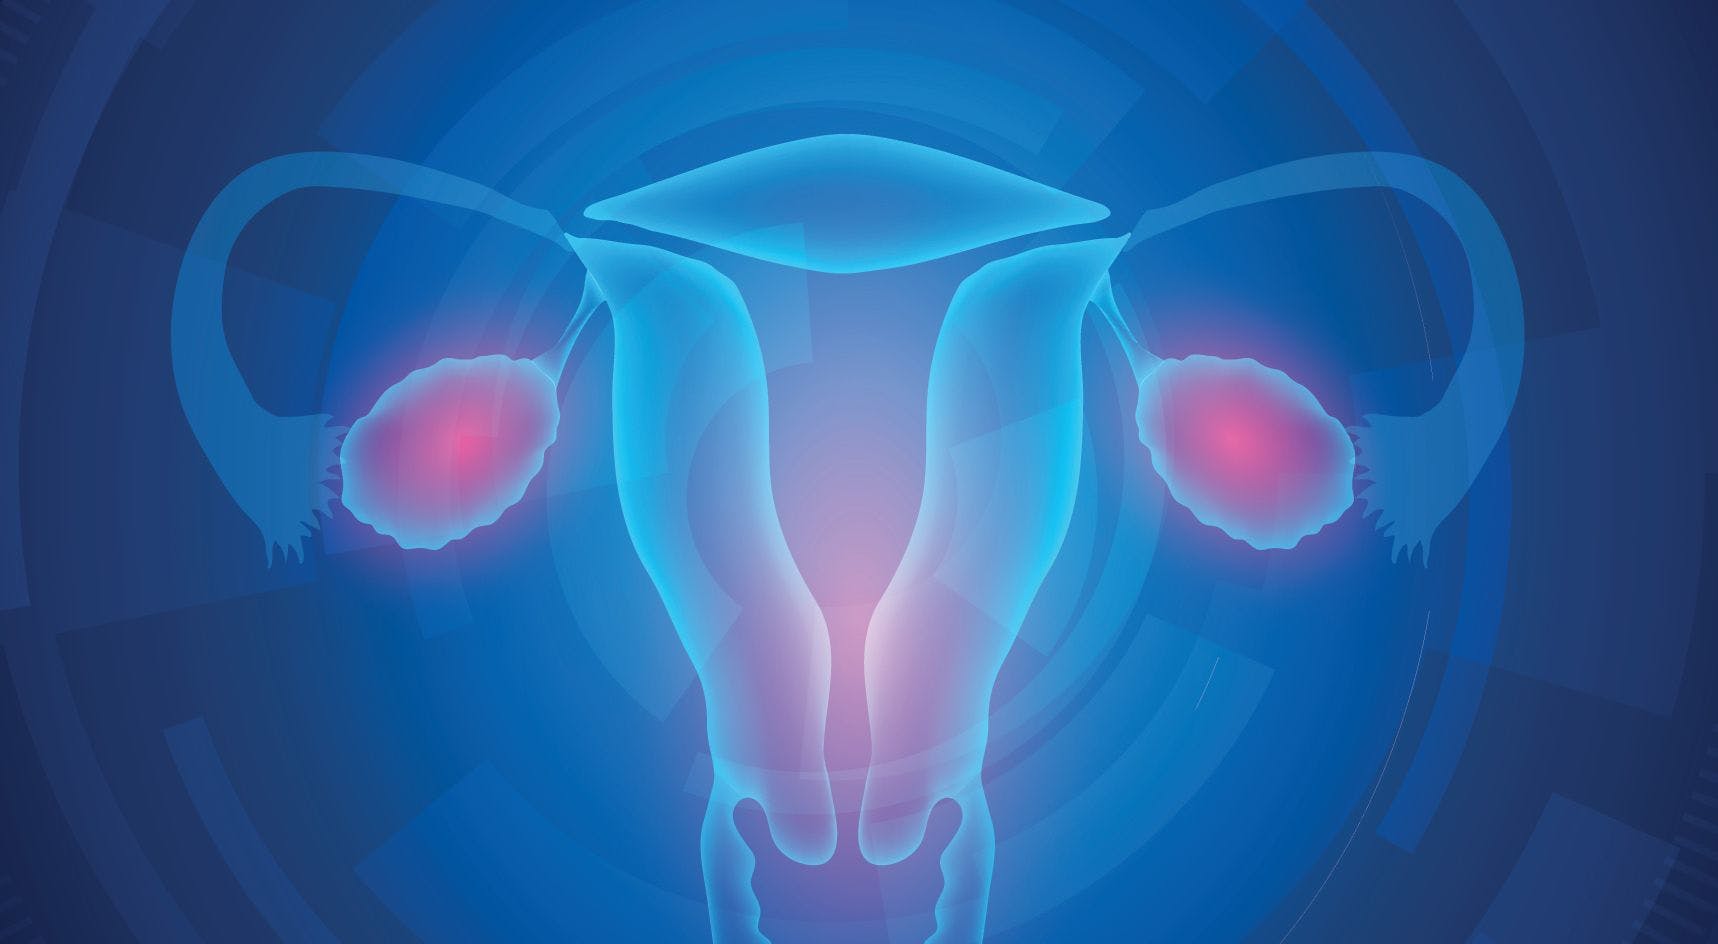 Zejula Maintenance Therapy Extends Symptom-Free Survival in Recurrent Ovarian Cancer